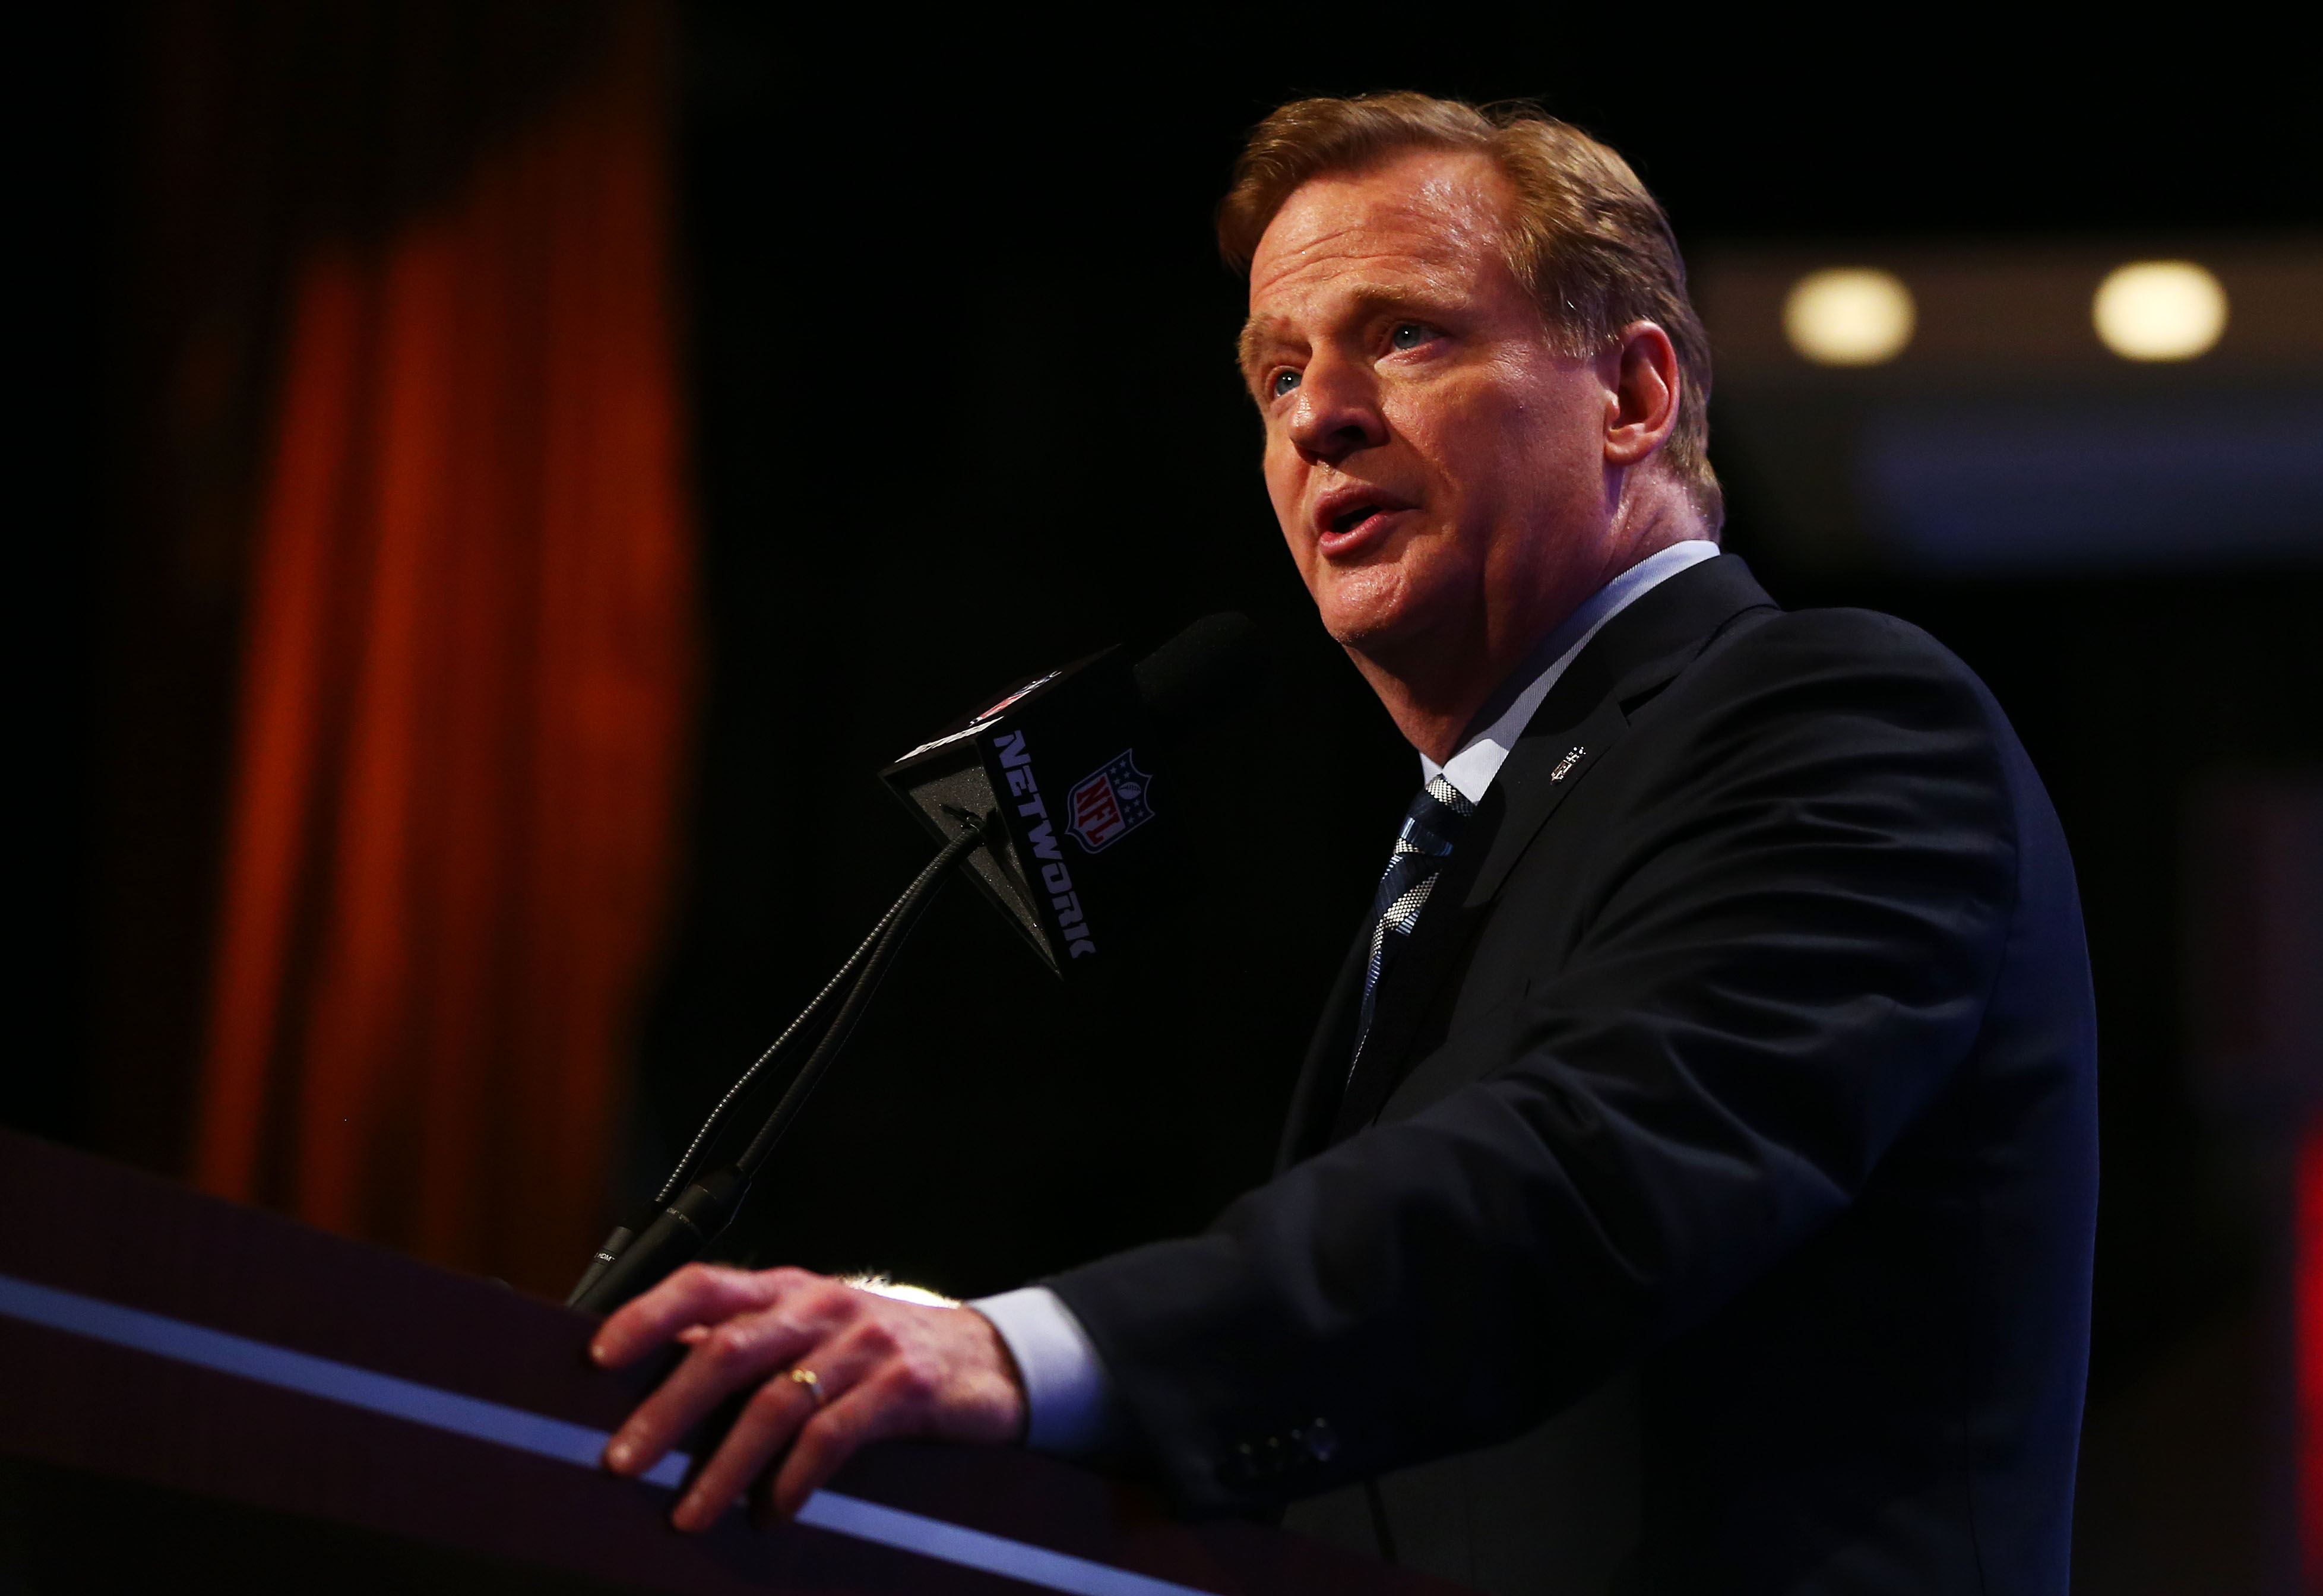 NFL Commissioner Roger Goodell, who admitted on Thursday that his punishment of Ray Race for domestic violence was too lenient, at the 2014 NFL  Draft. (Elsa&mdash;Getty Images)